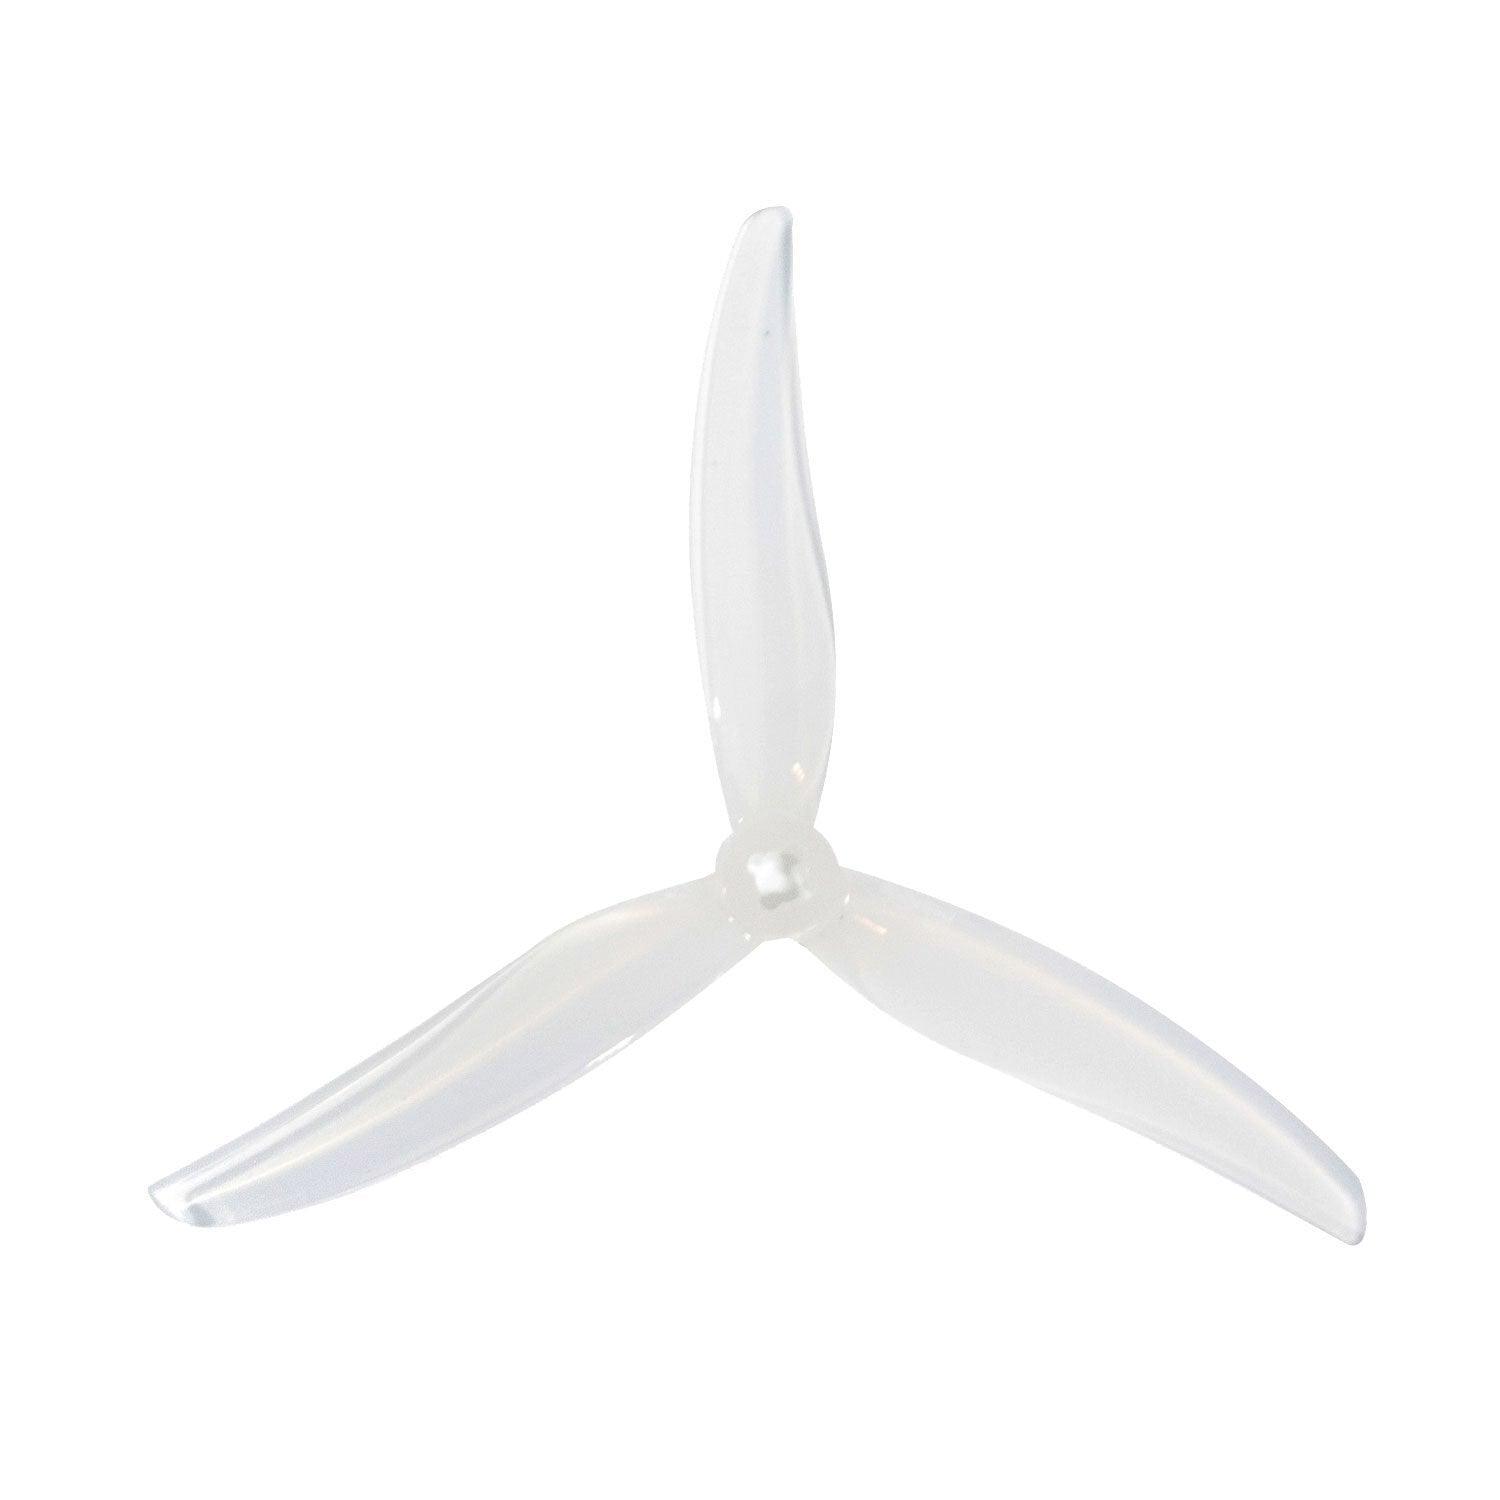 Gemfan 5130 Propeller - Length Suitable For Crocodile5 Baby Series Drone 5inch For DIY RC FPV Replacement Accessories Parts - RCDrone